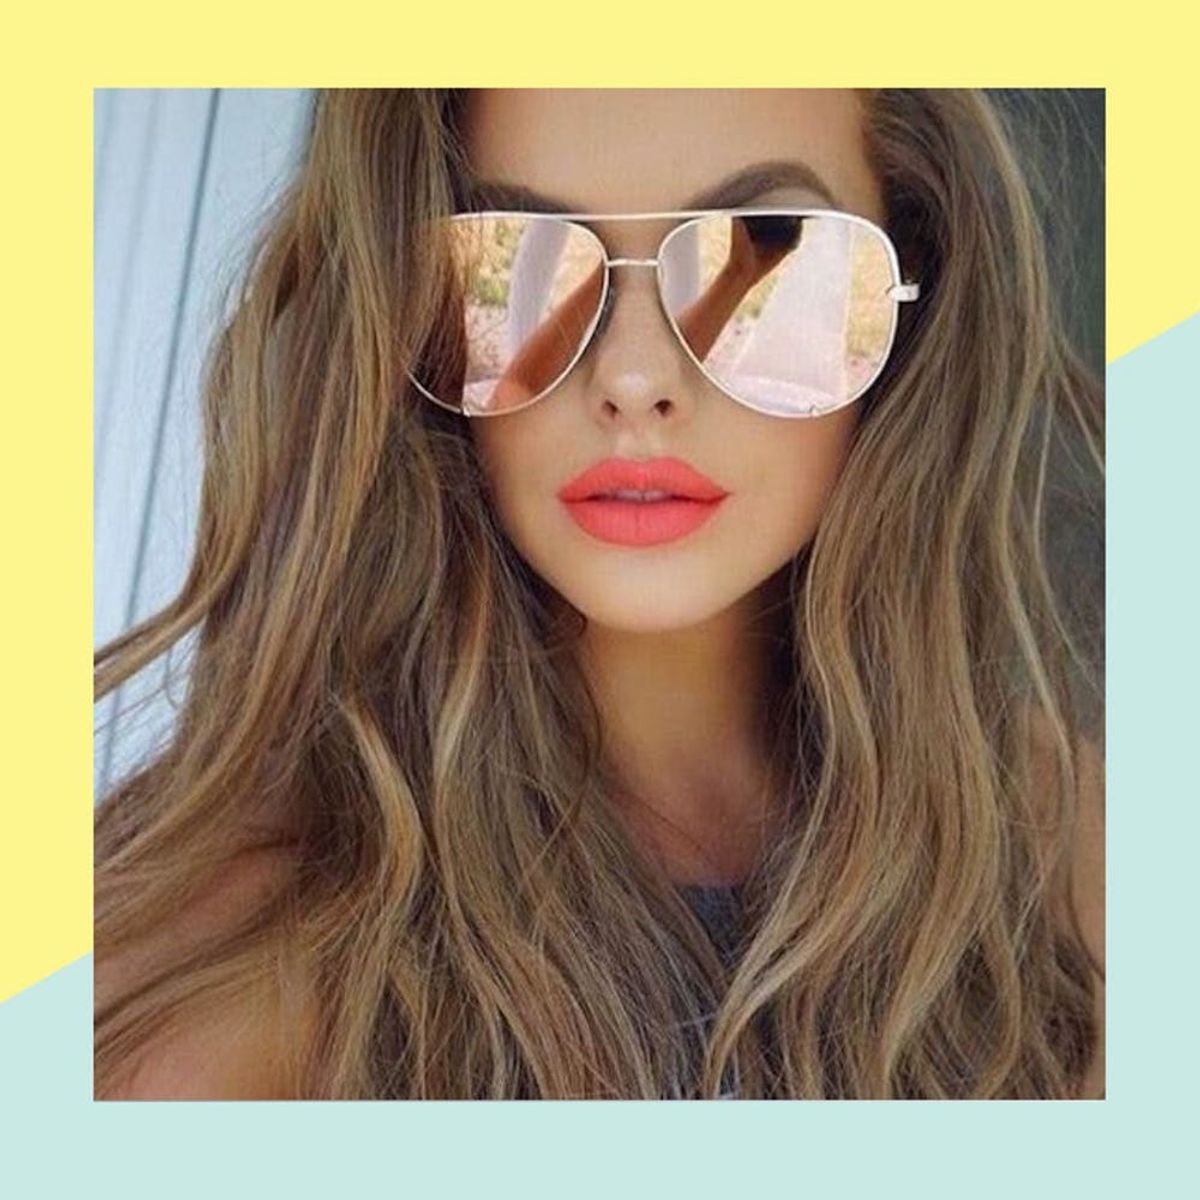 Pinterest Is Seriously Crushing on These Sunglass Trends for Summer